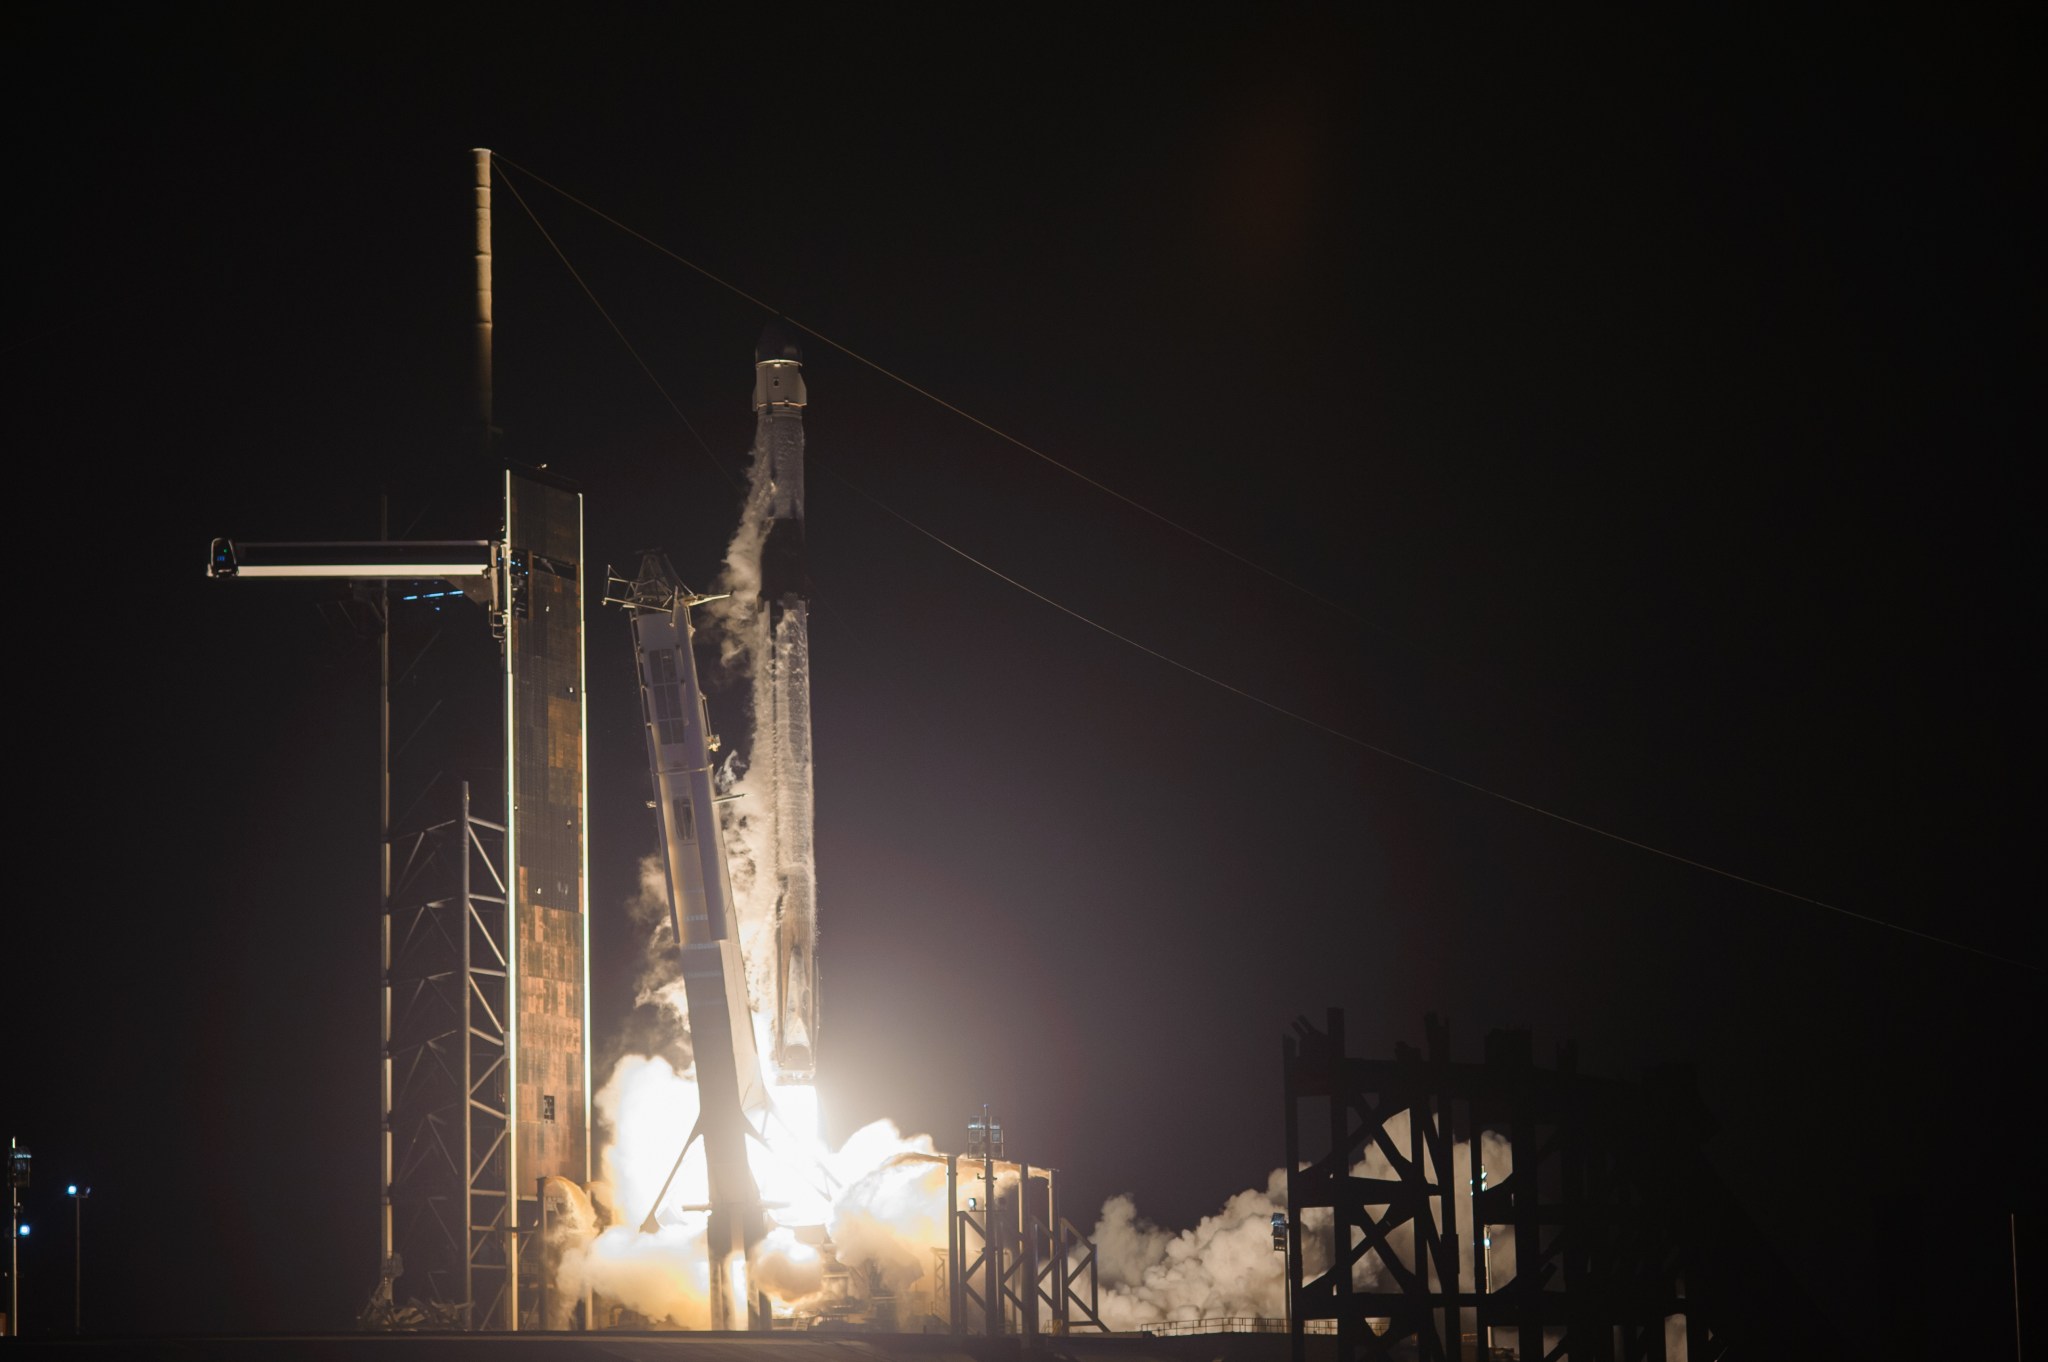 A SpaceX Falcon 9 rocket lifts off from Launch Complex 39A at NASA’s Kennedy Space Center in Florida at 3:14 a.m. on Aug. 29, 2021, carrying the Dragon spacecraft.